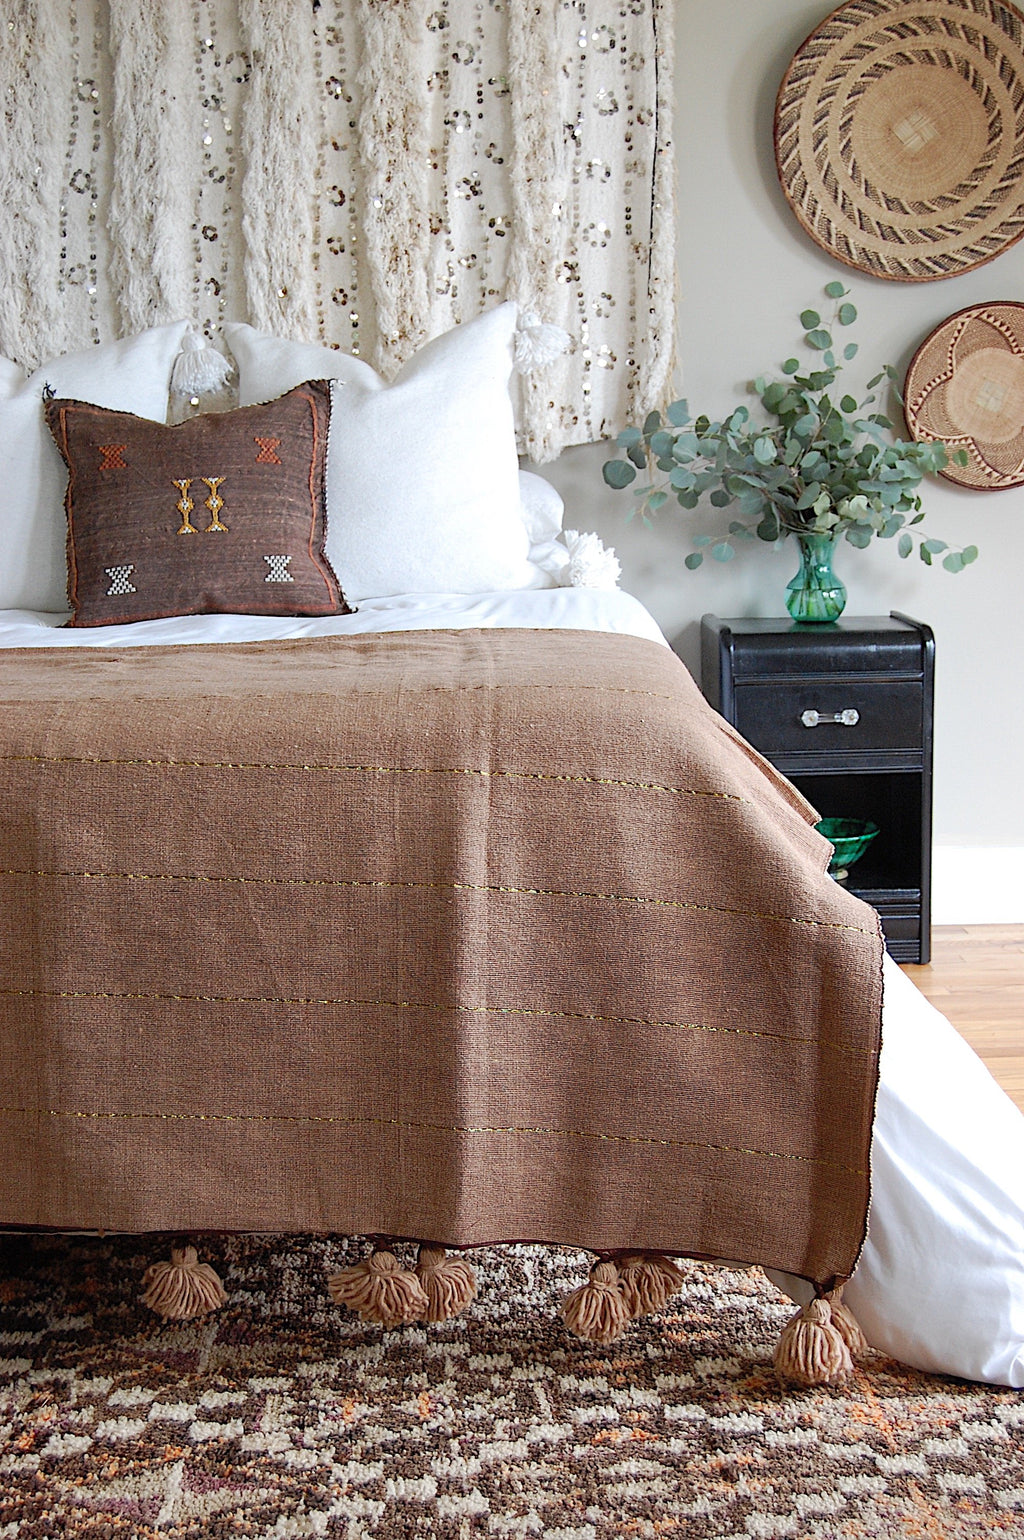 Beige Moroccan Pom pom blanket on top of a bed with pillows in a bedroom with berber furniture - Moroccan Interior